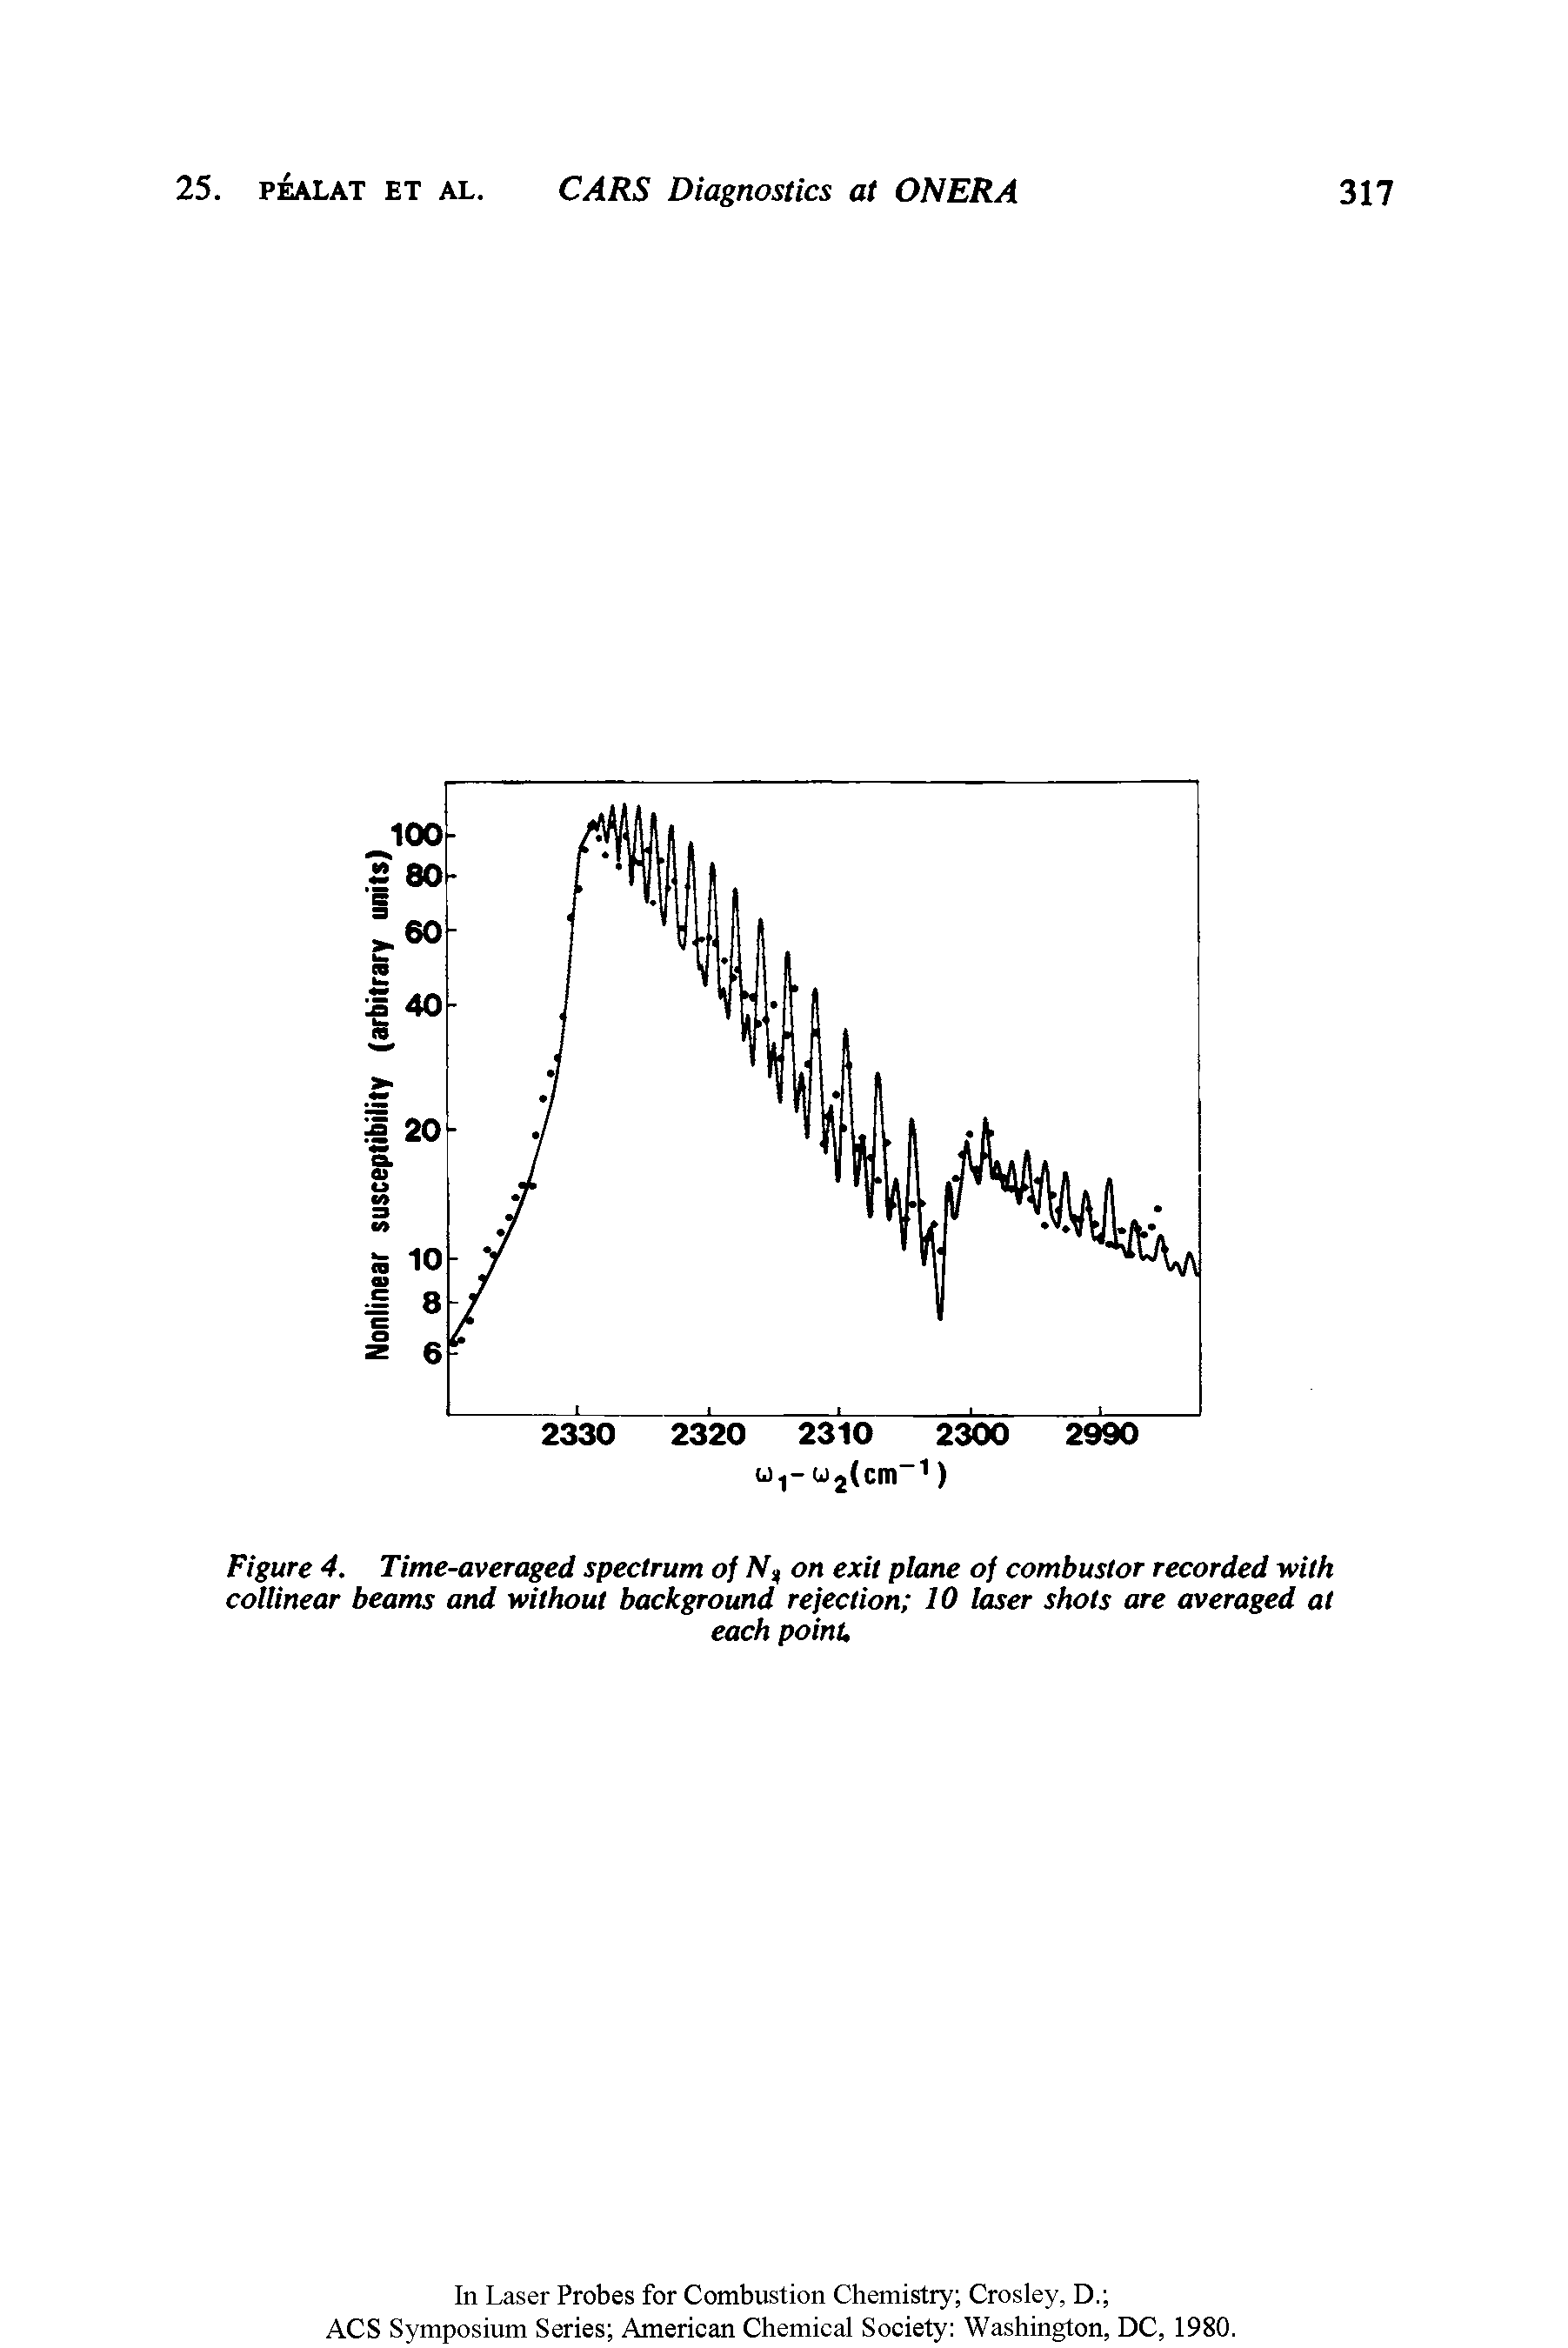 Figure 4. Time-averaged spectrum of N, on exit plane of combustor recorded with collinear beams and without background rejection 10 laser shots are averaged at...